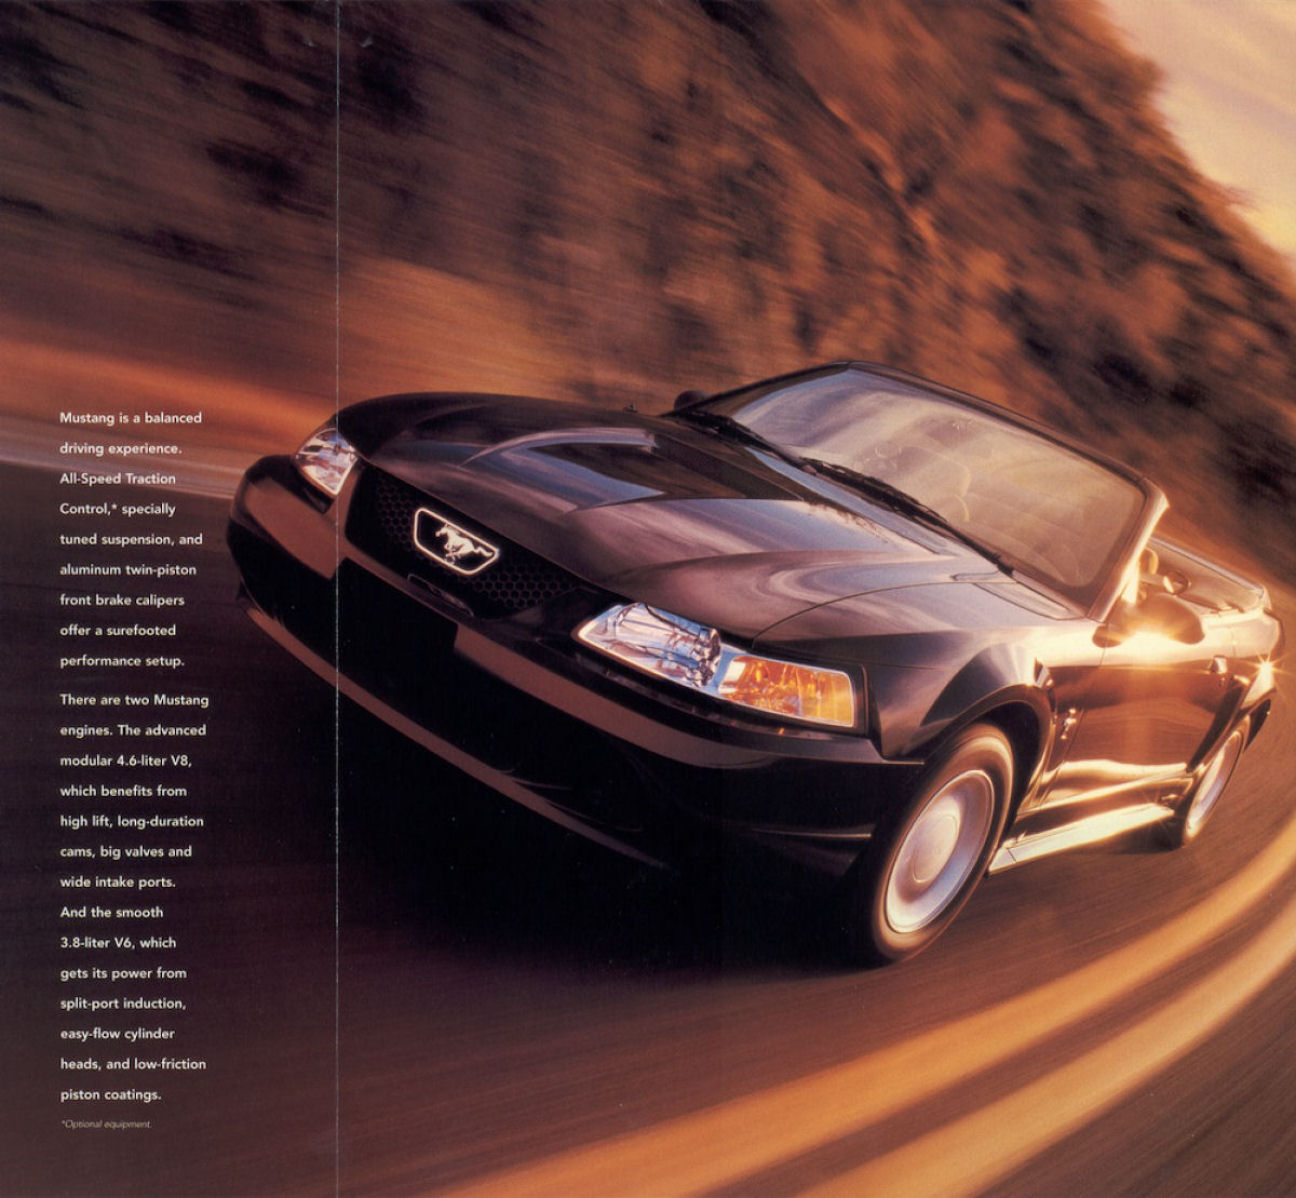 2000_Ford_Mustang_Foldout-08